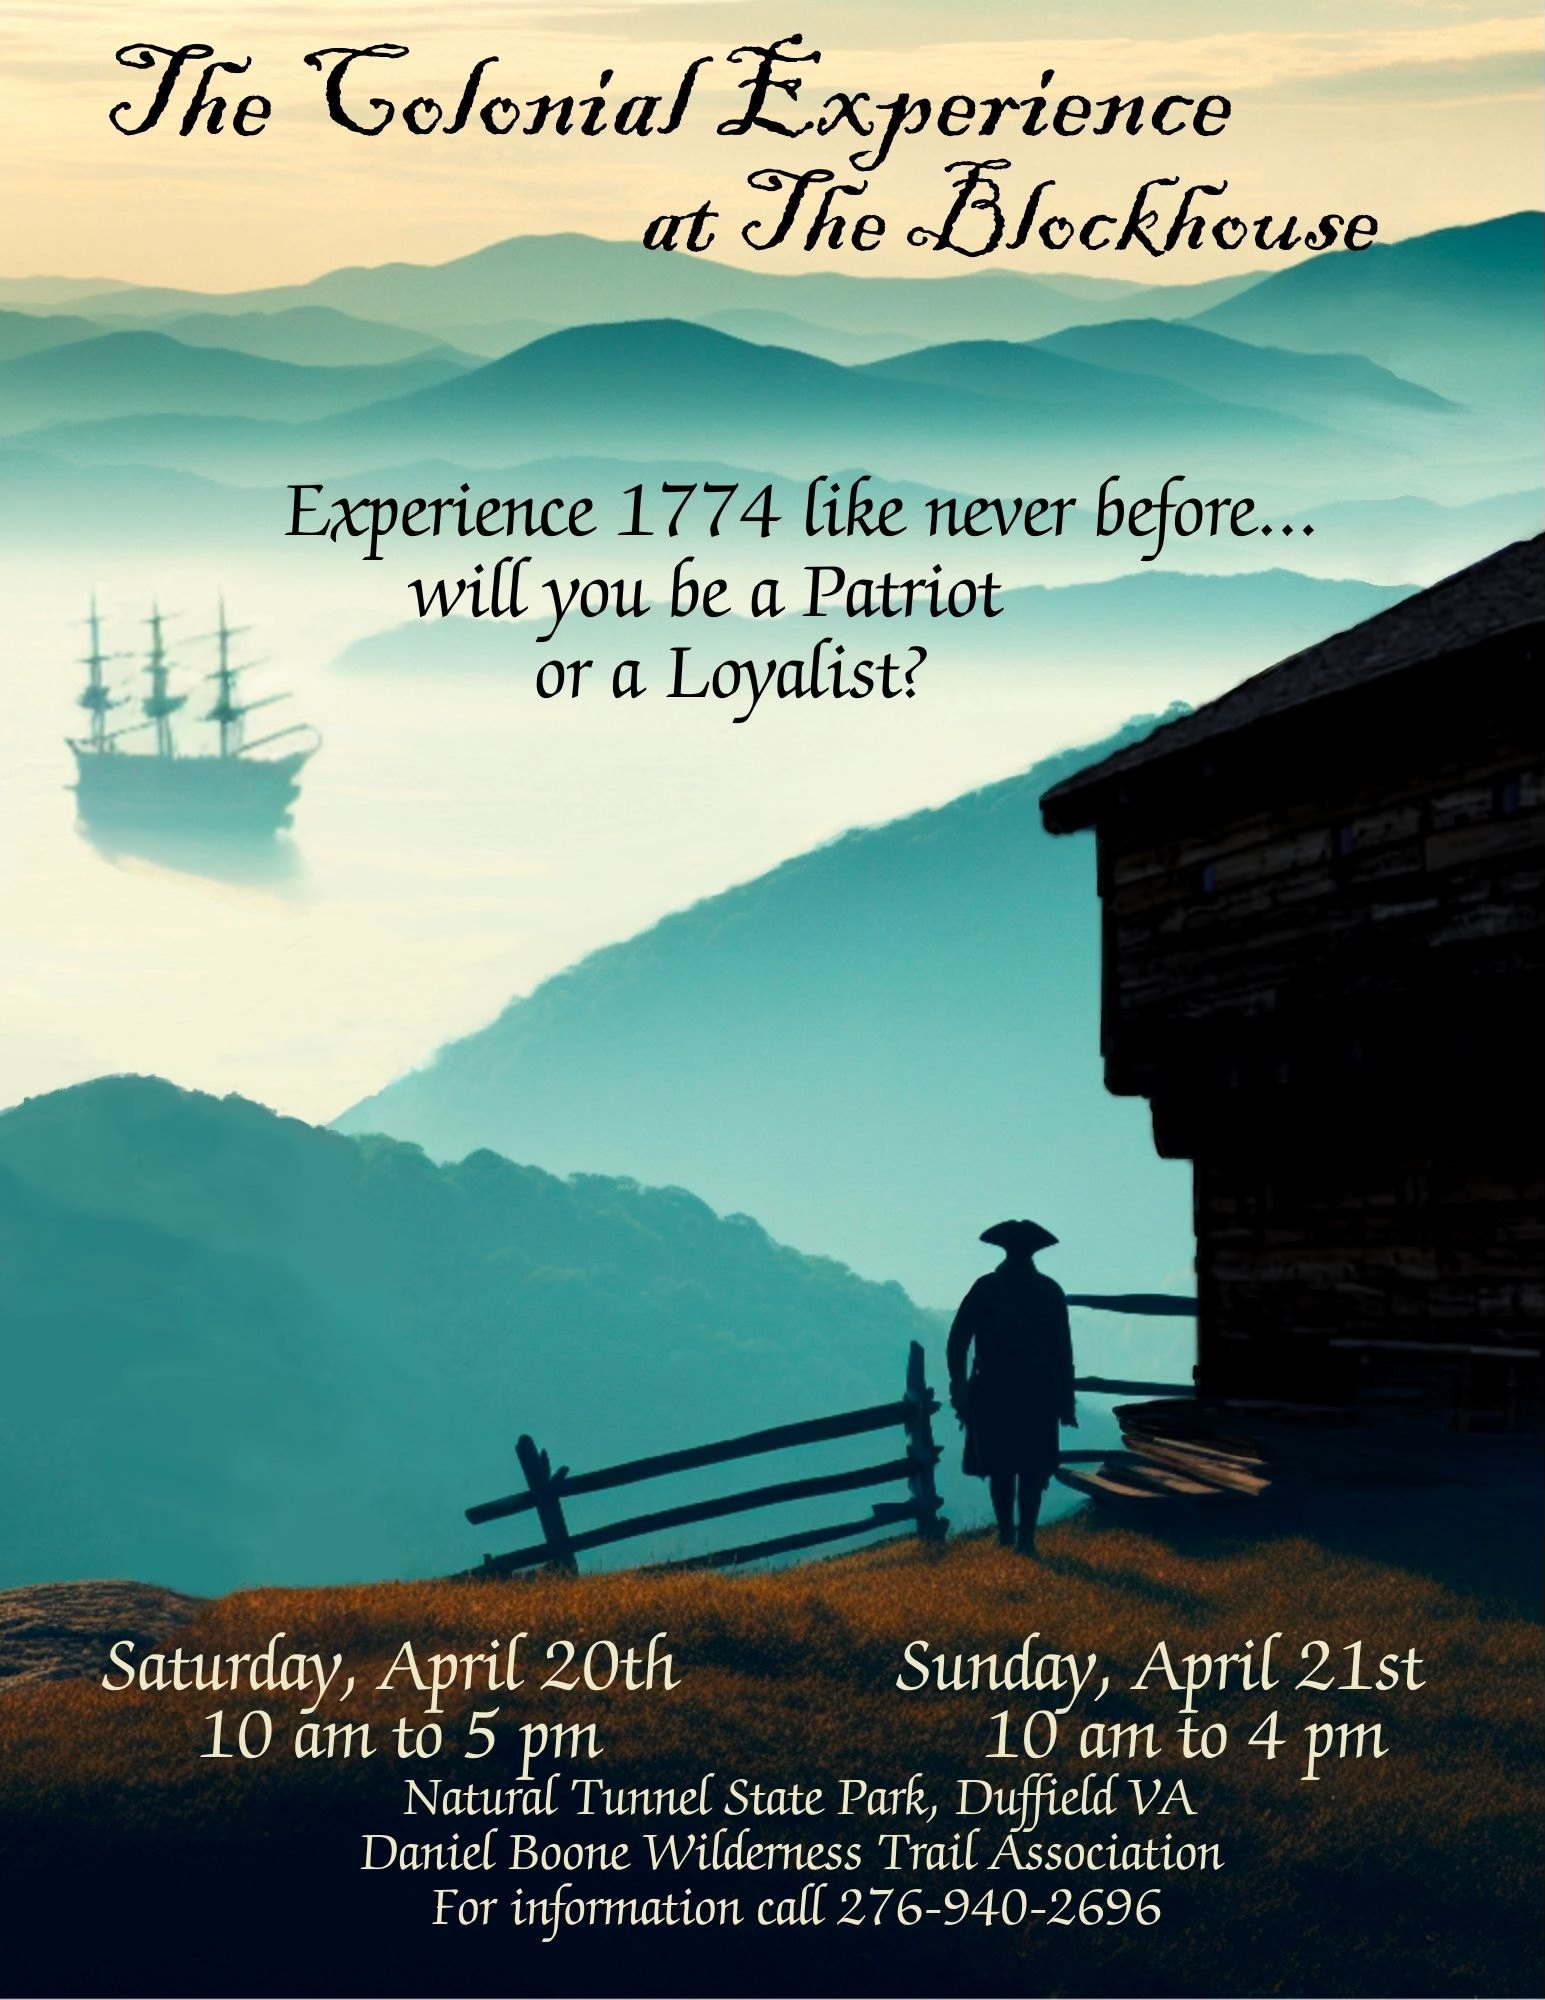 The Colonial Experience at the Blockhouse